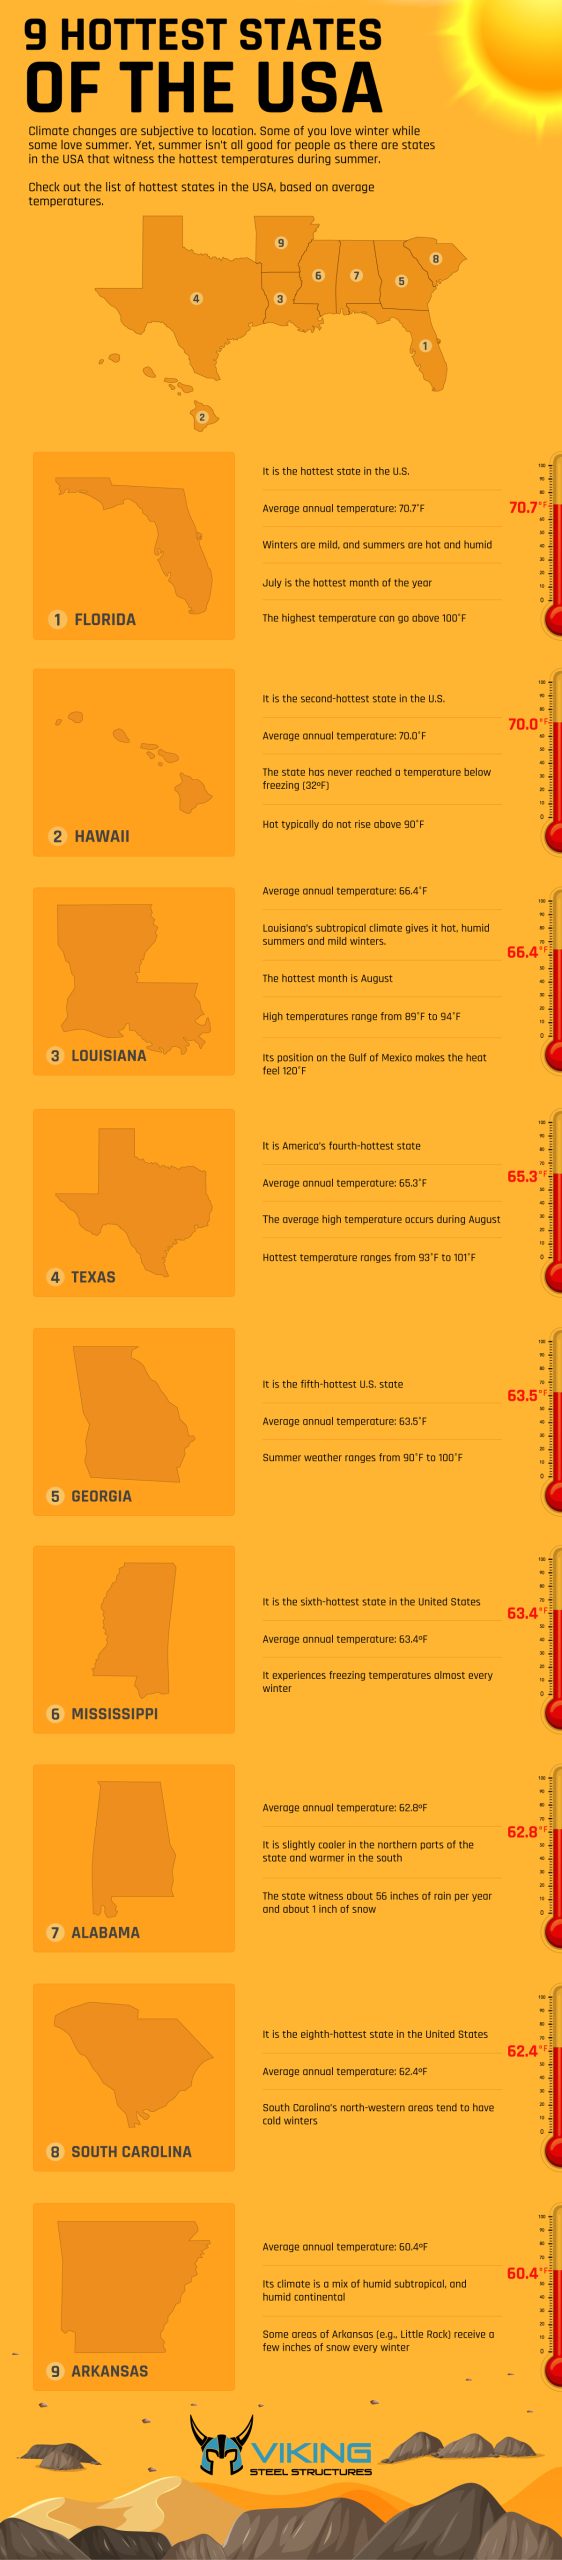 9 Hottest States of the USA